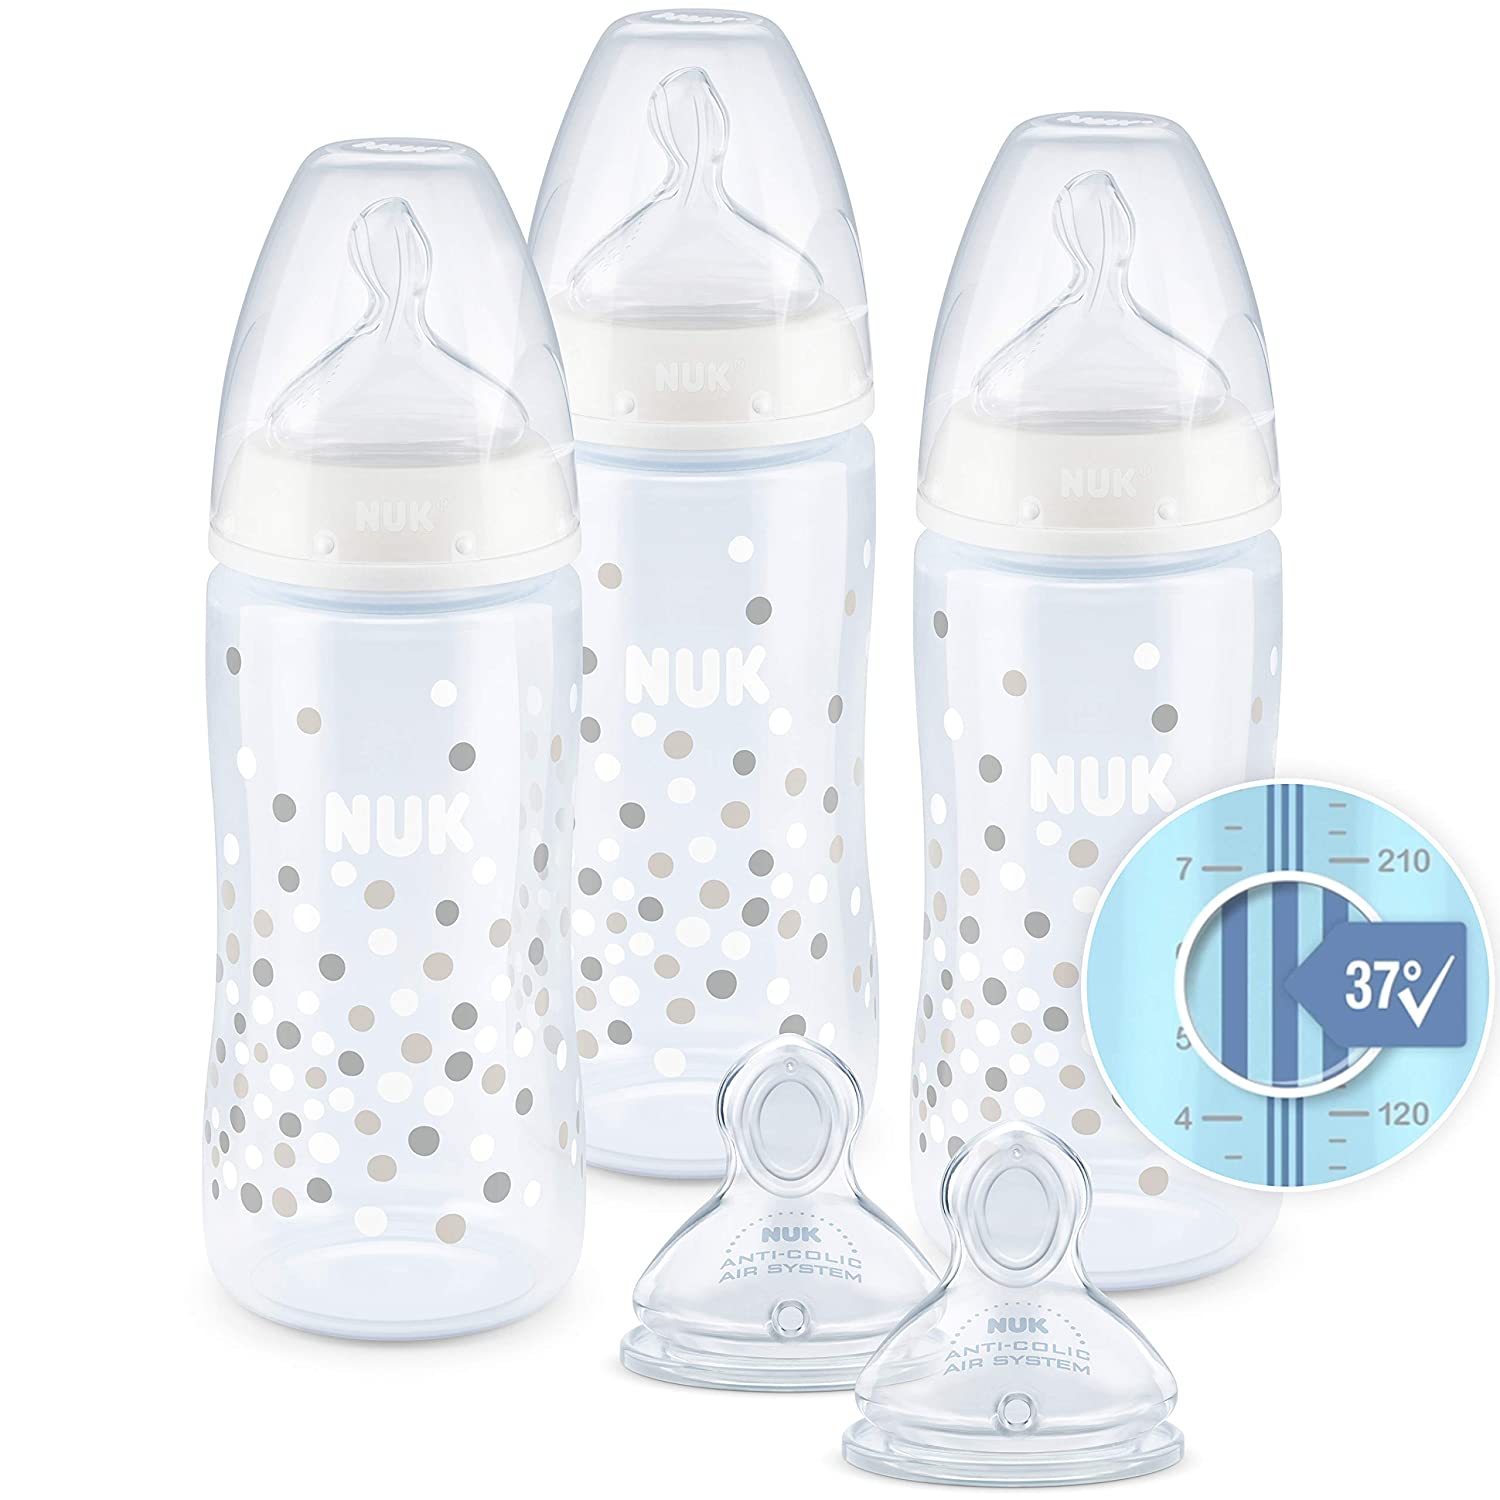 Nuk First Choice+ Baby Bottle Set, 3 Bottles with Temperature Control Display, Anti-Colic, 300 ml, 0-6 Months, Silicone Teat, BPA-Free